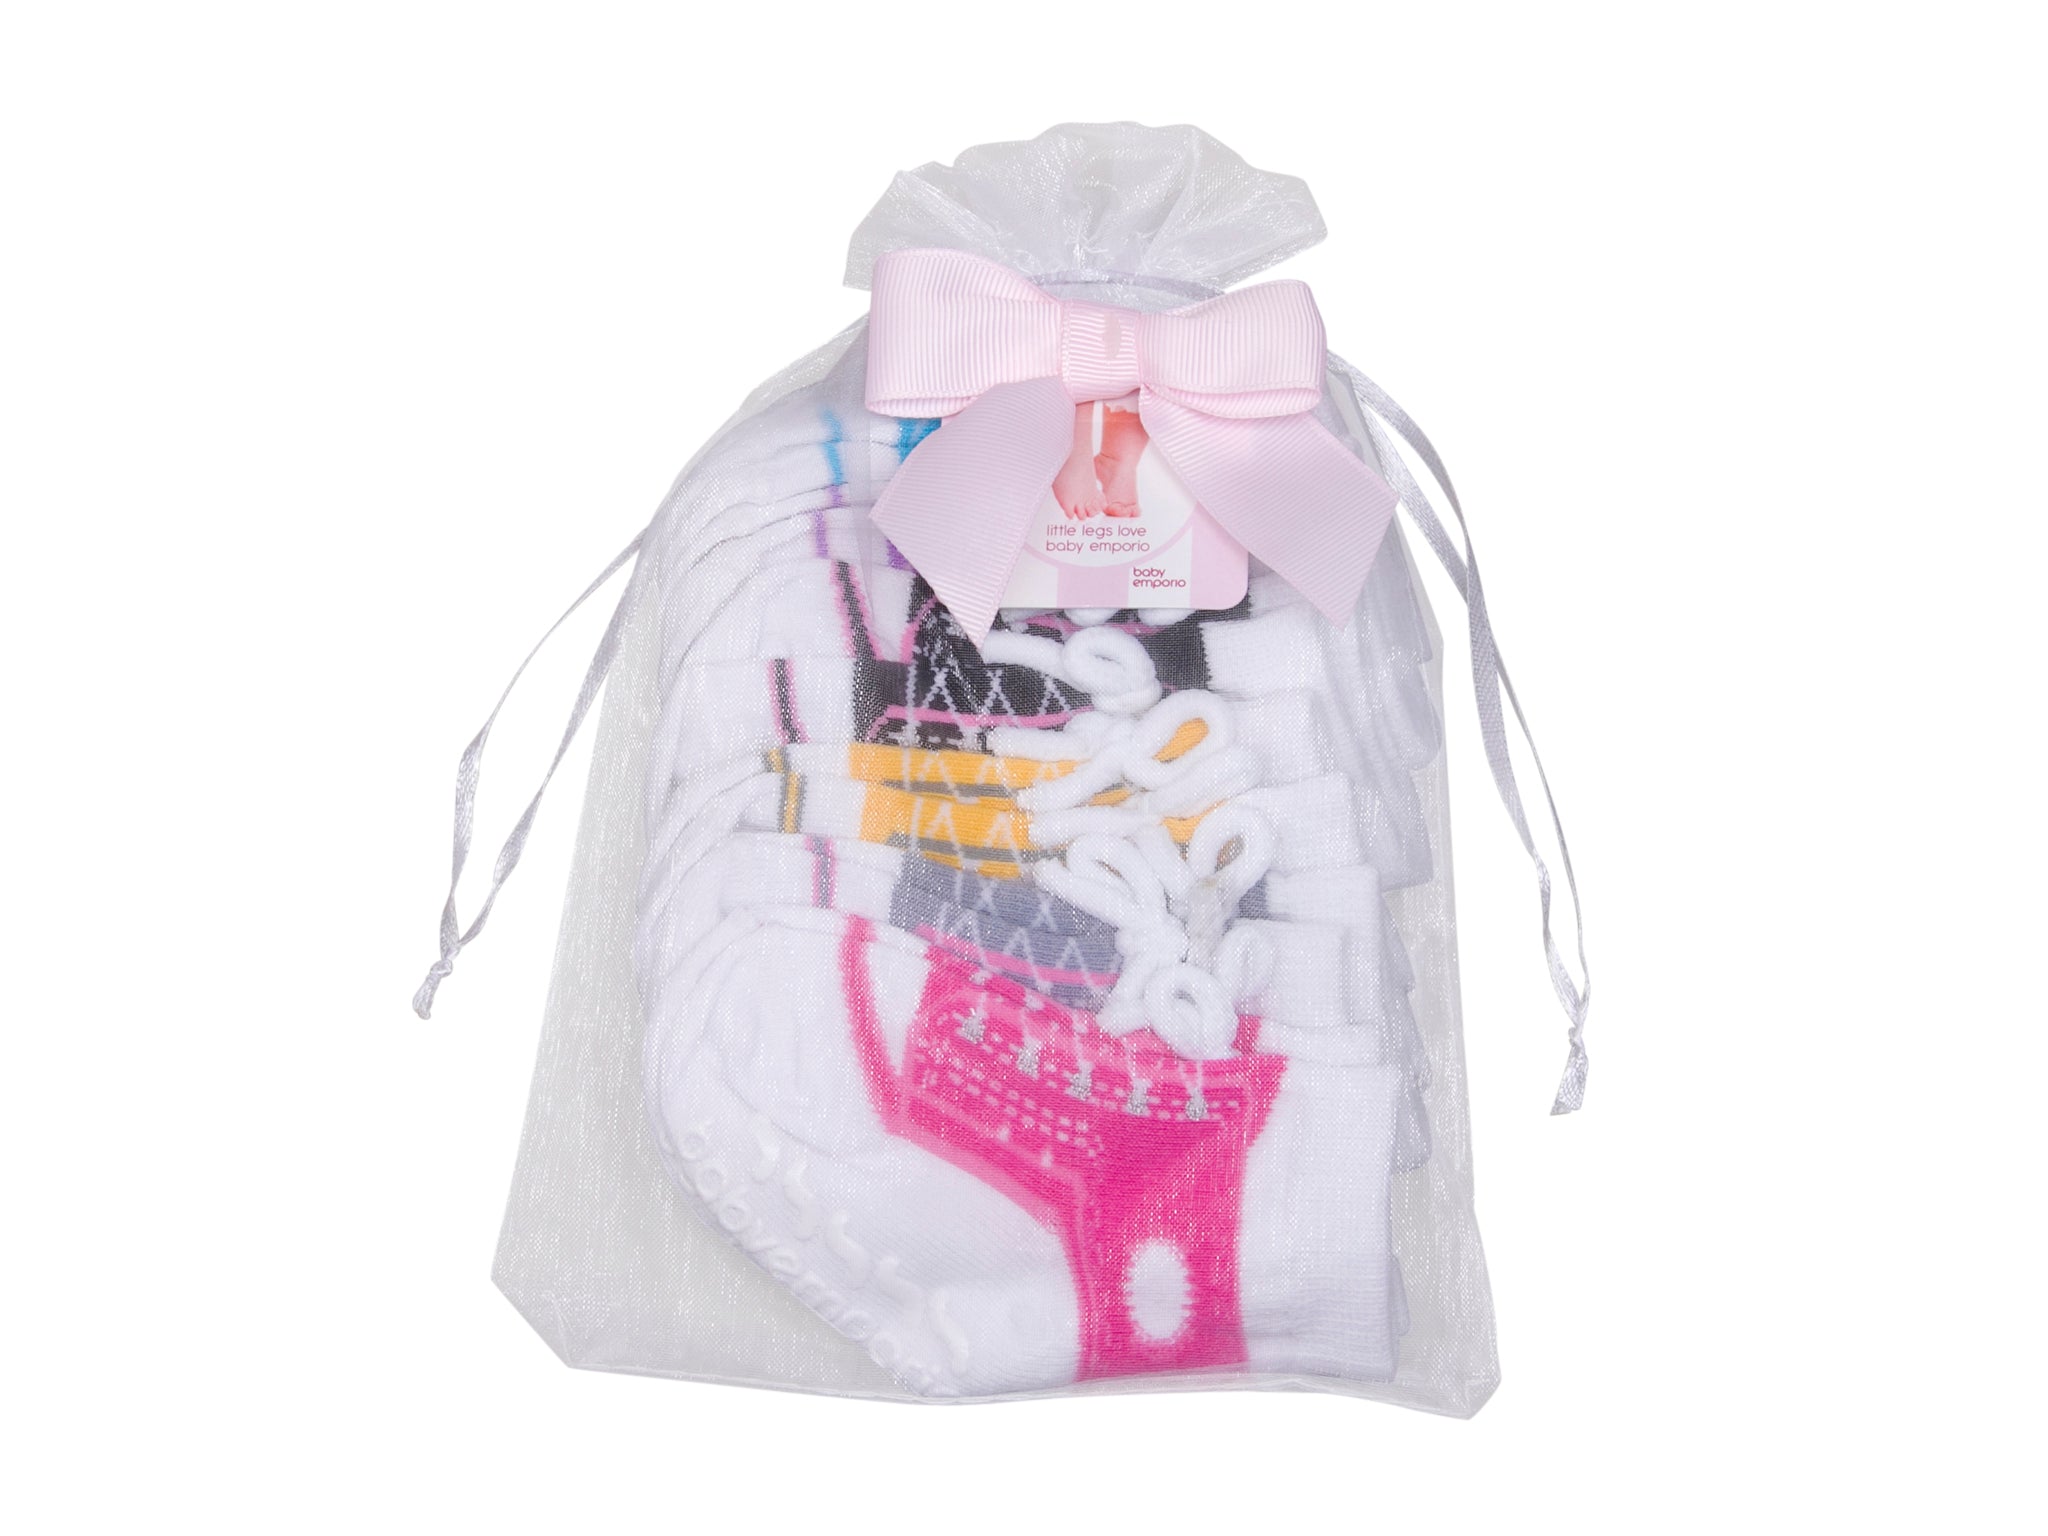 Gift package of 6 pairs of socks with sneaker look and faux shoelaces for age 12-24 months